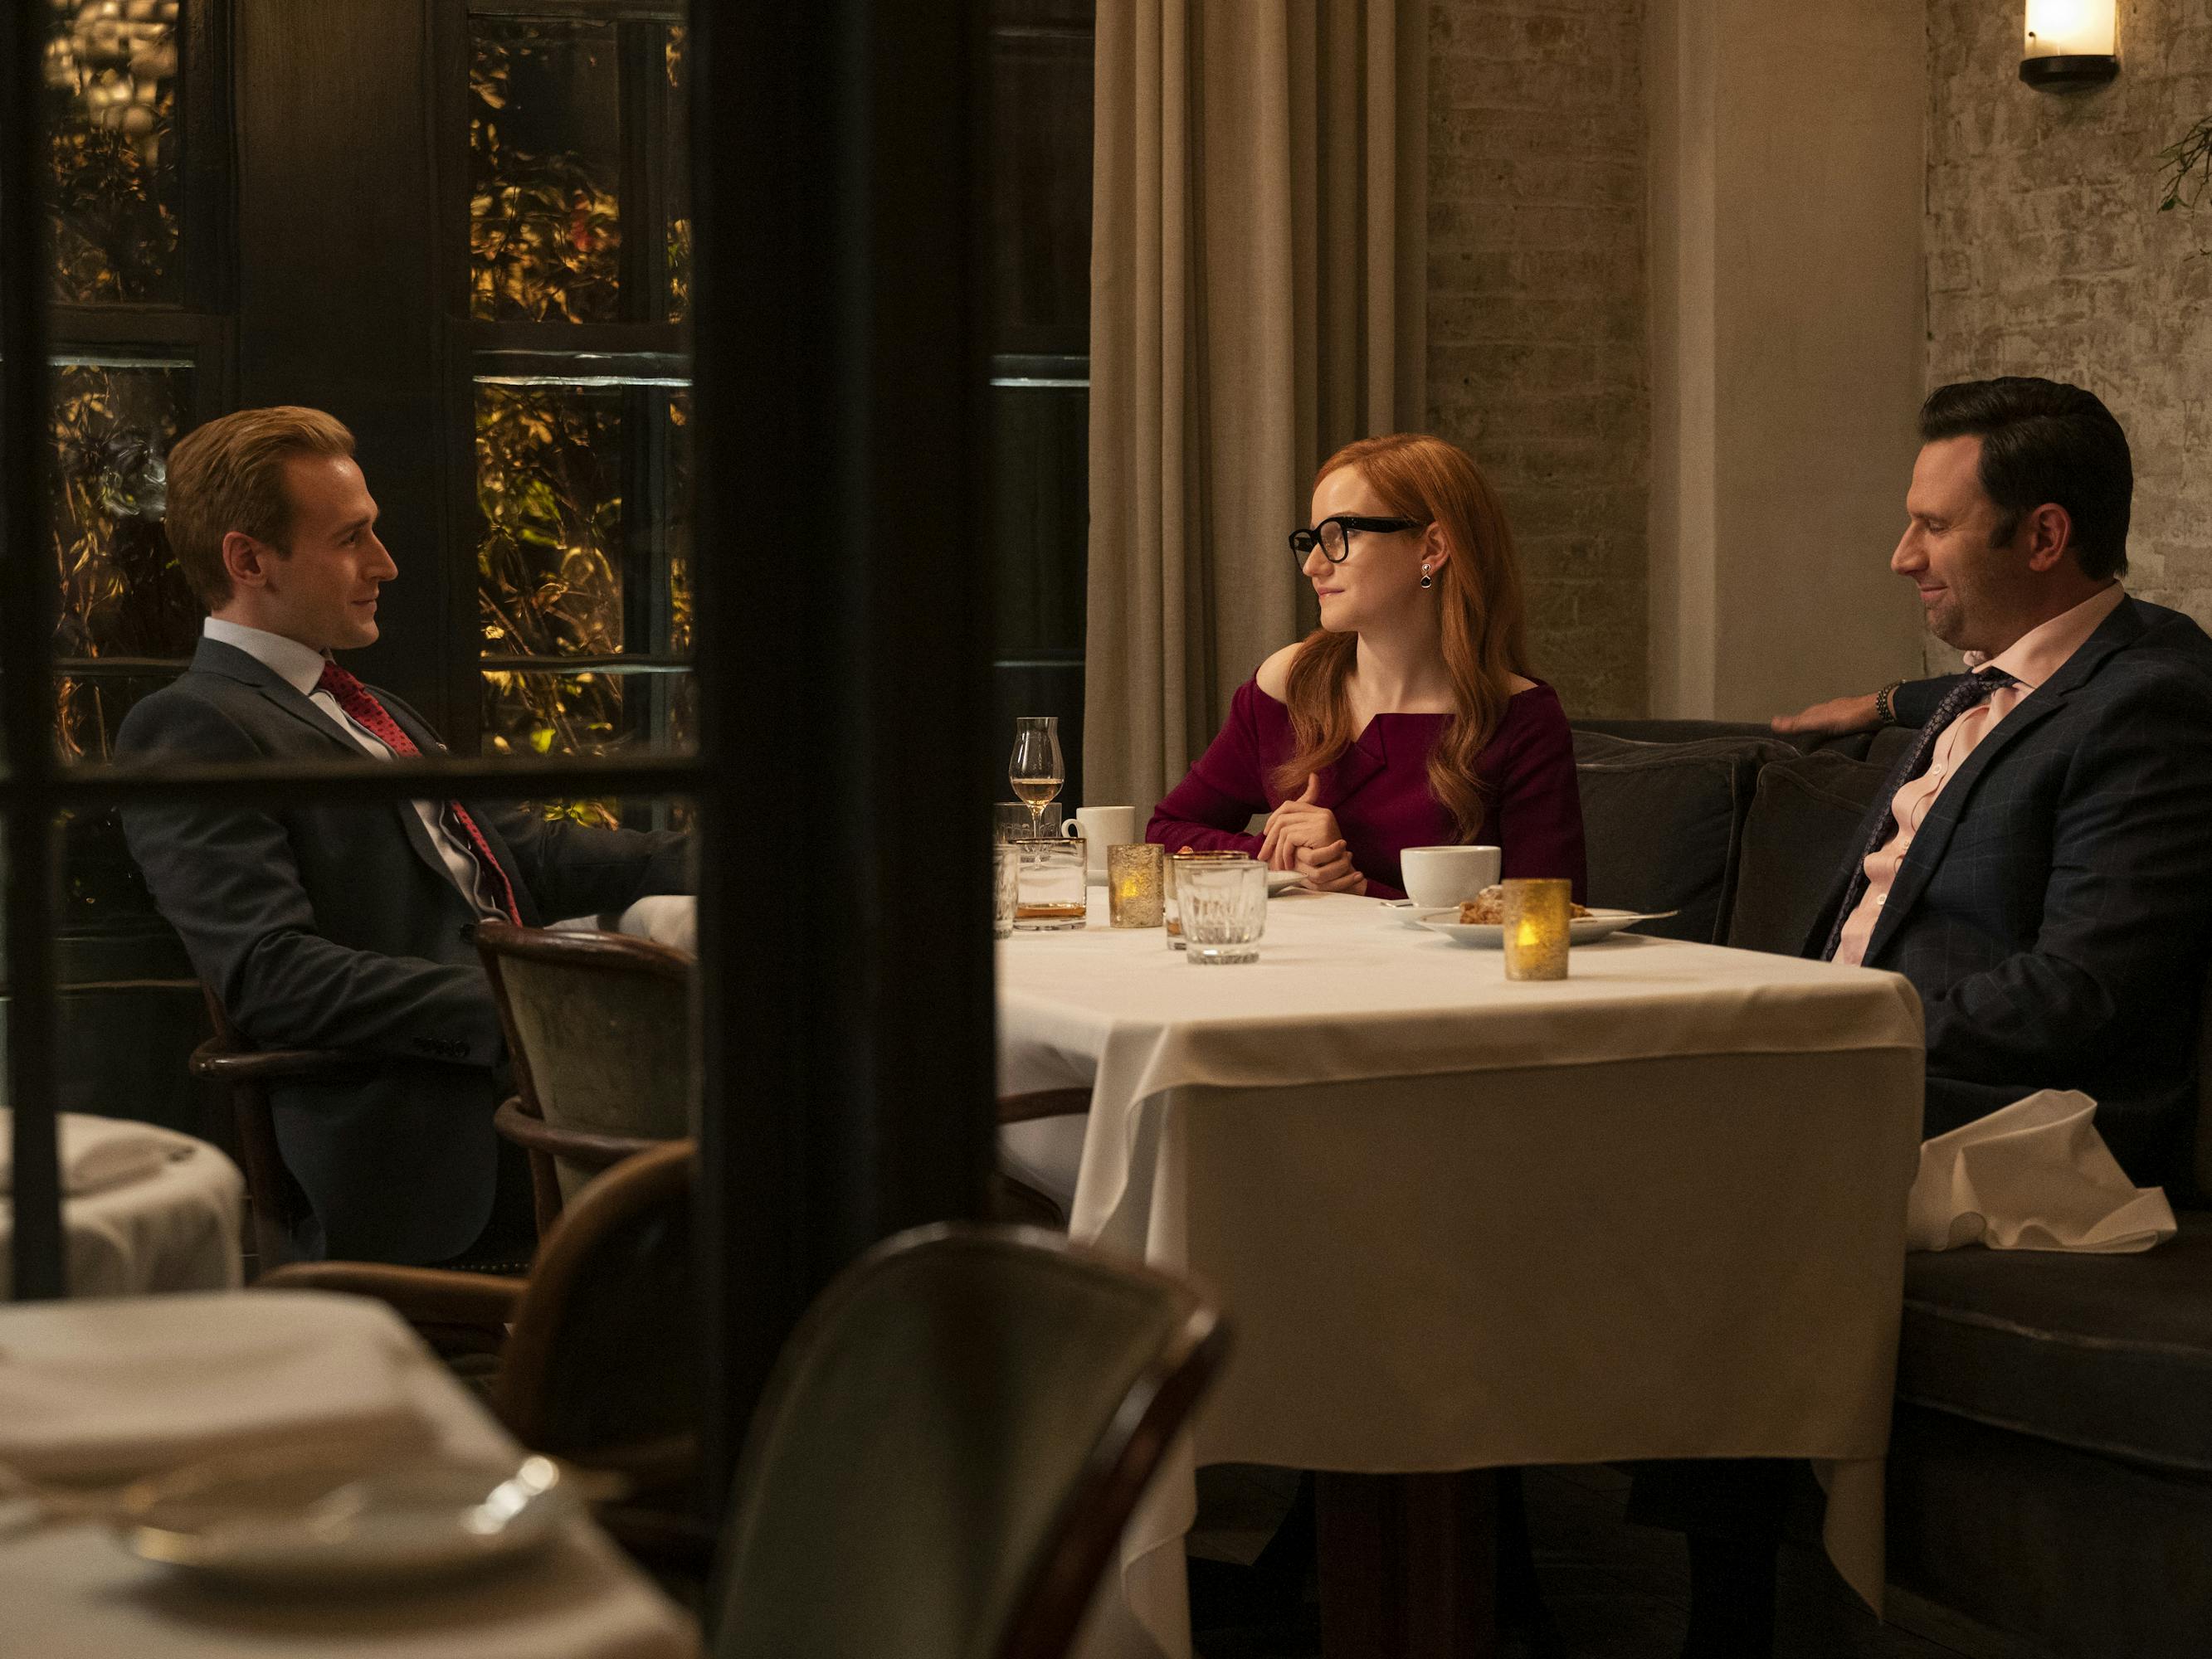 Chris Cafero, Anna Delvey, and the Jupiter Group representative sit at a dinner table. The men wear suits and Delvey wears a red dress and black framed glasses. On the table is wine, candles, and glasses of water.